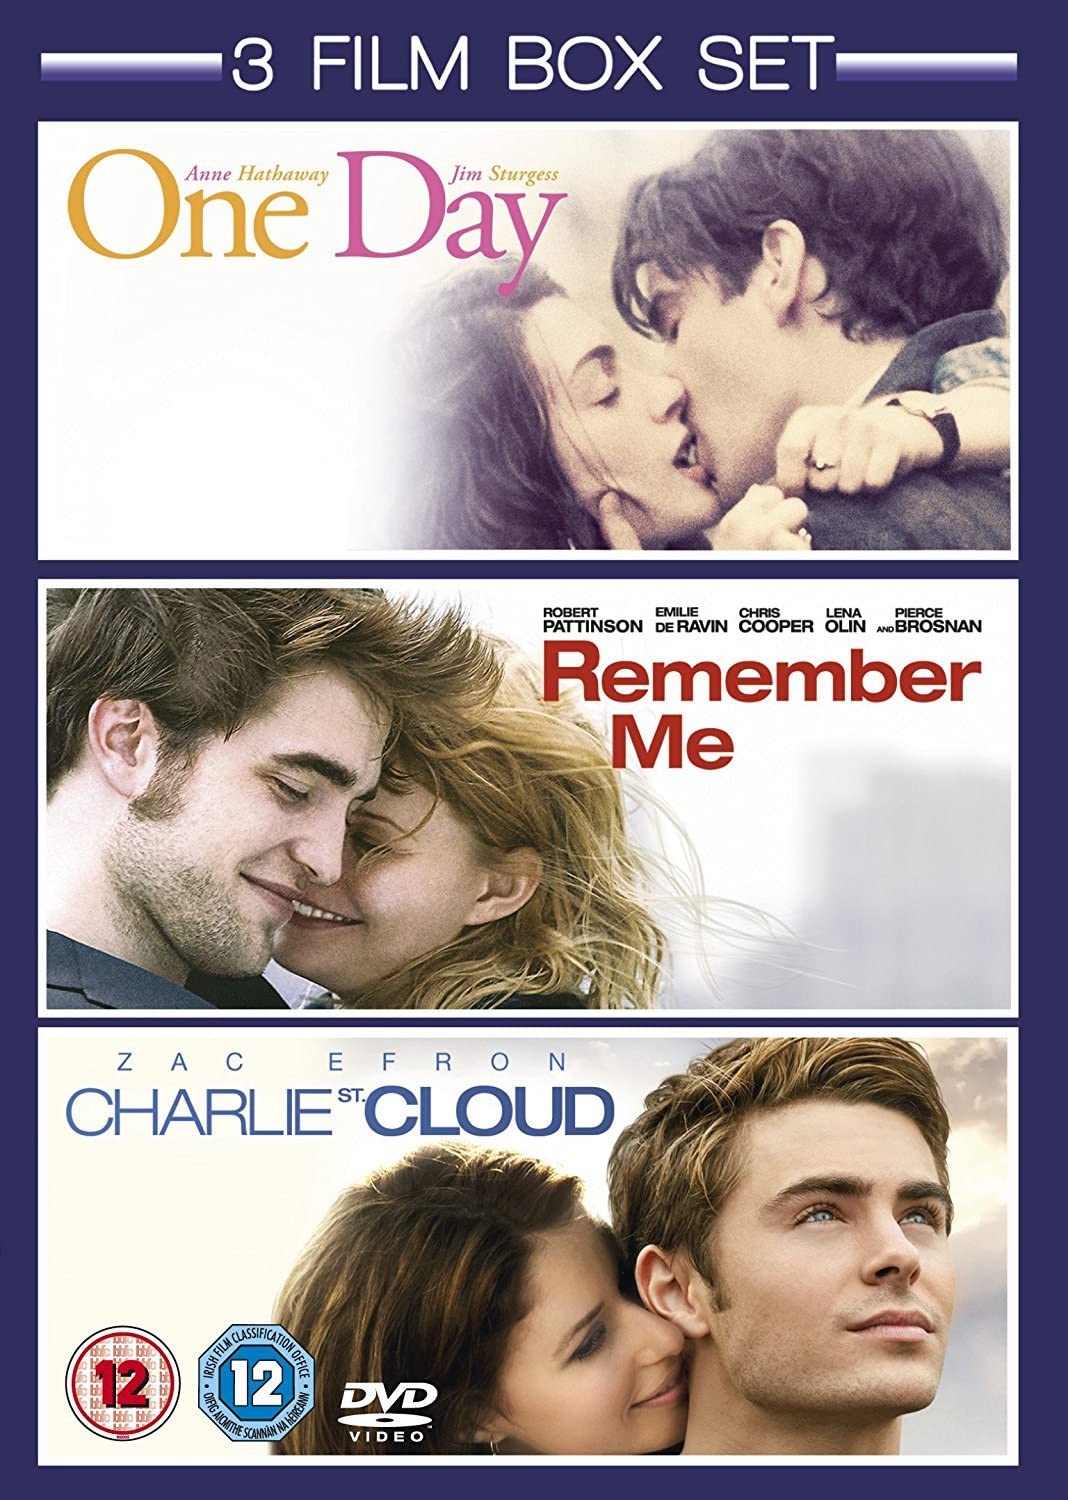 One Day (2012) / Remember Me (2010) / Charlie St Cloud (2011) - Triple Pack -Romance/Drama [DVD]